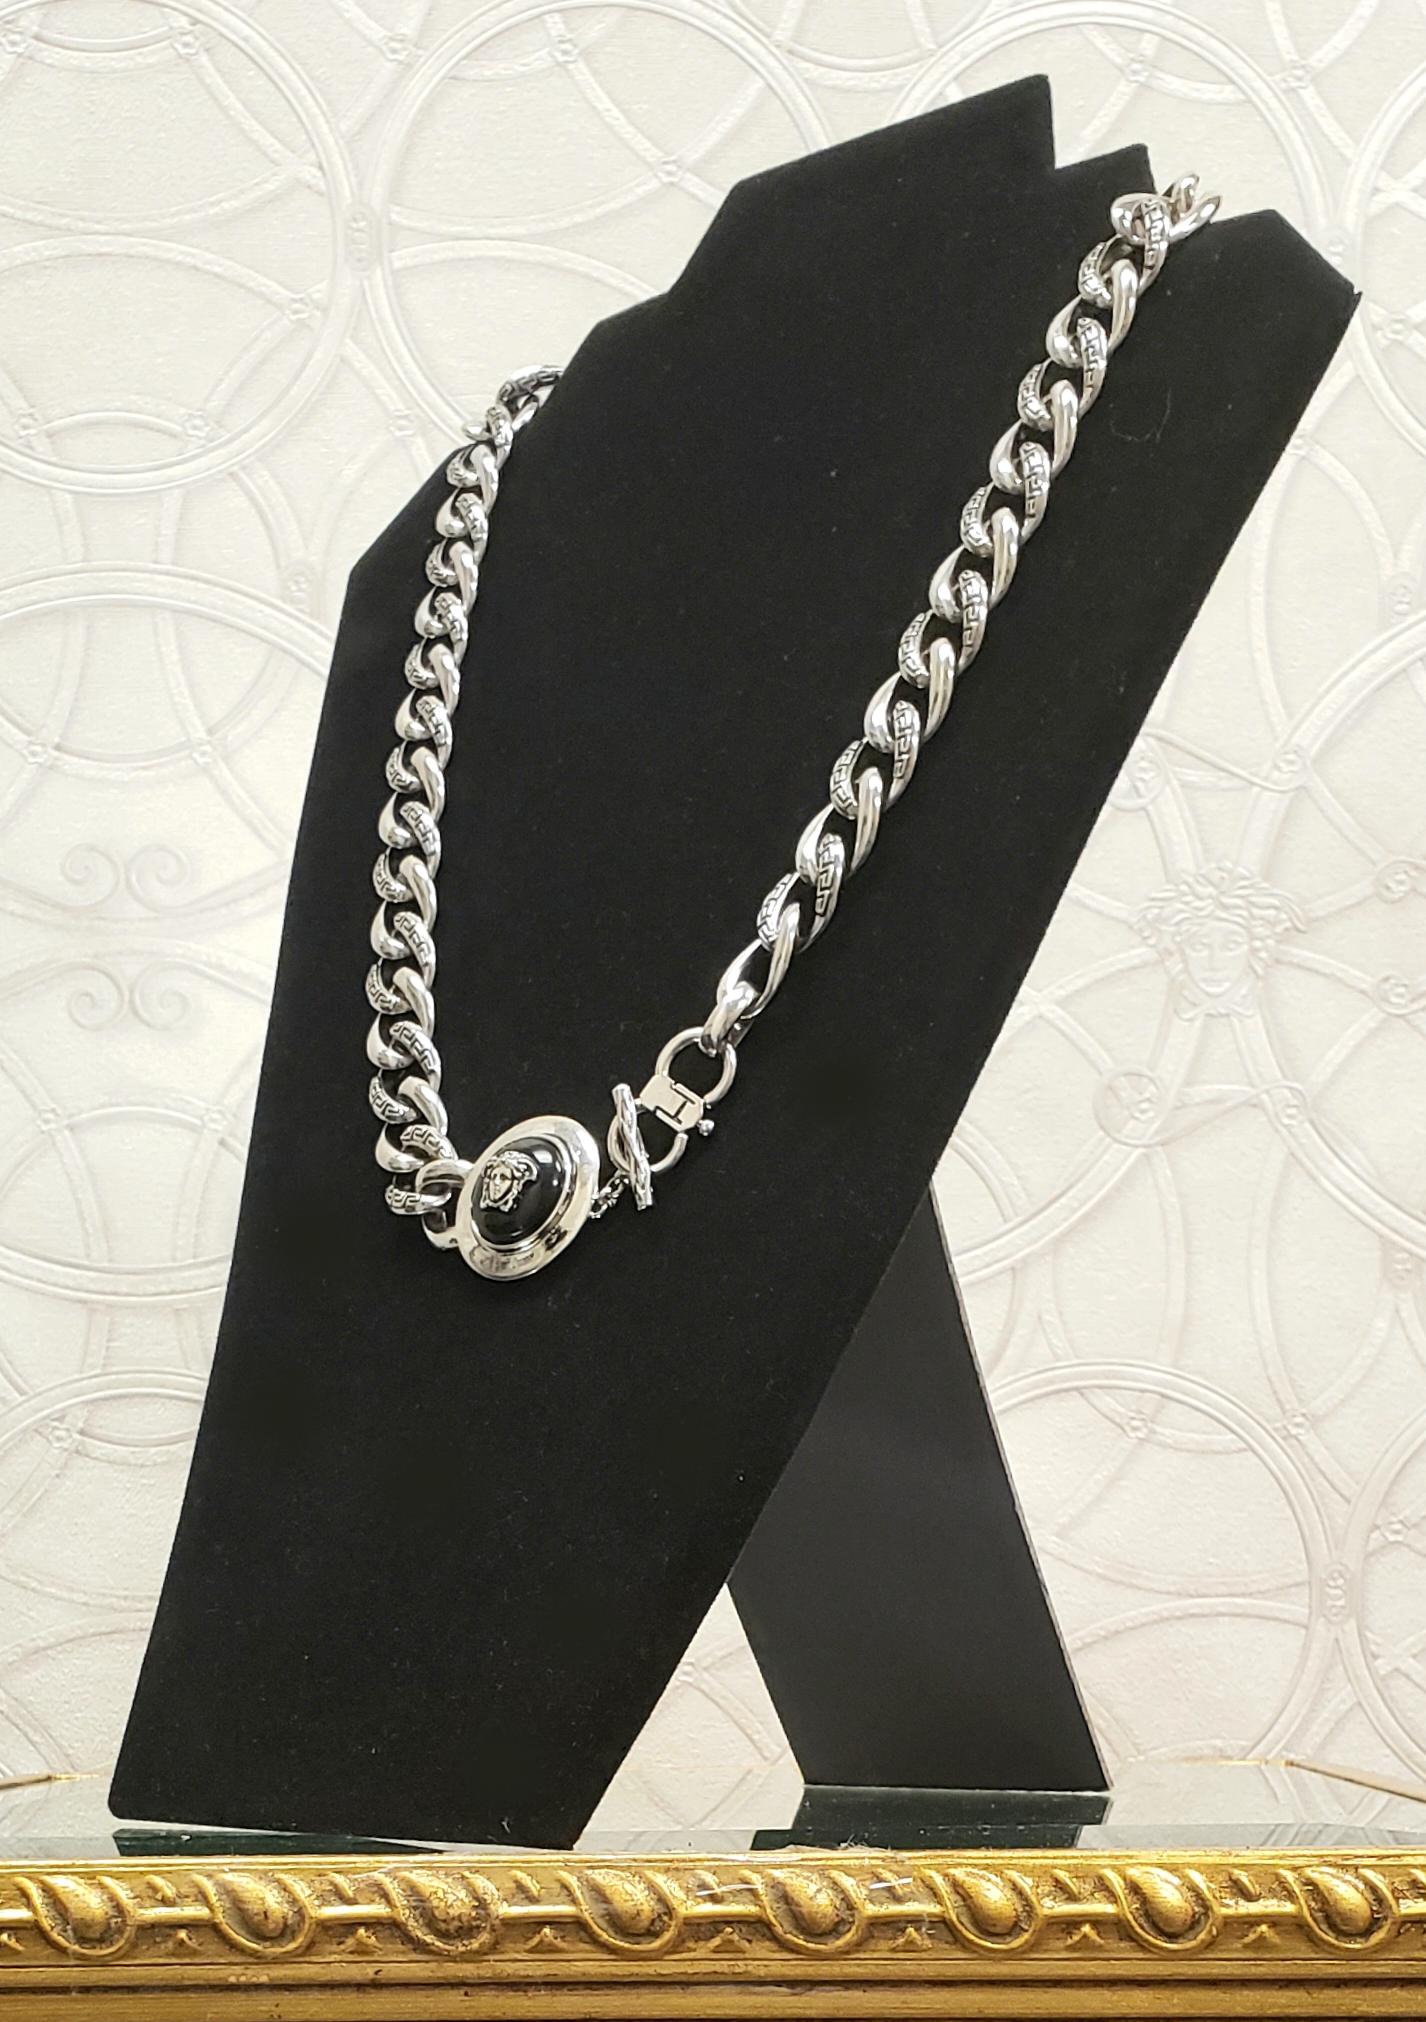 Women's or Men's Spring 2011 L# 33 NEW VERSACE SILVER TONE METAL NECKLACE and BRACELET